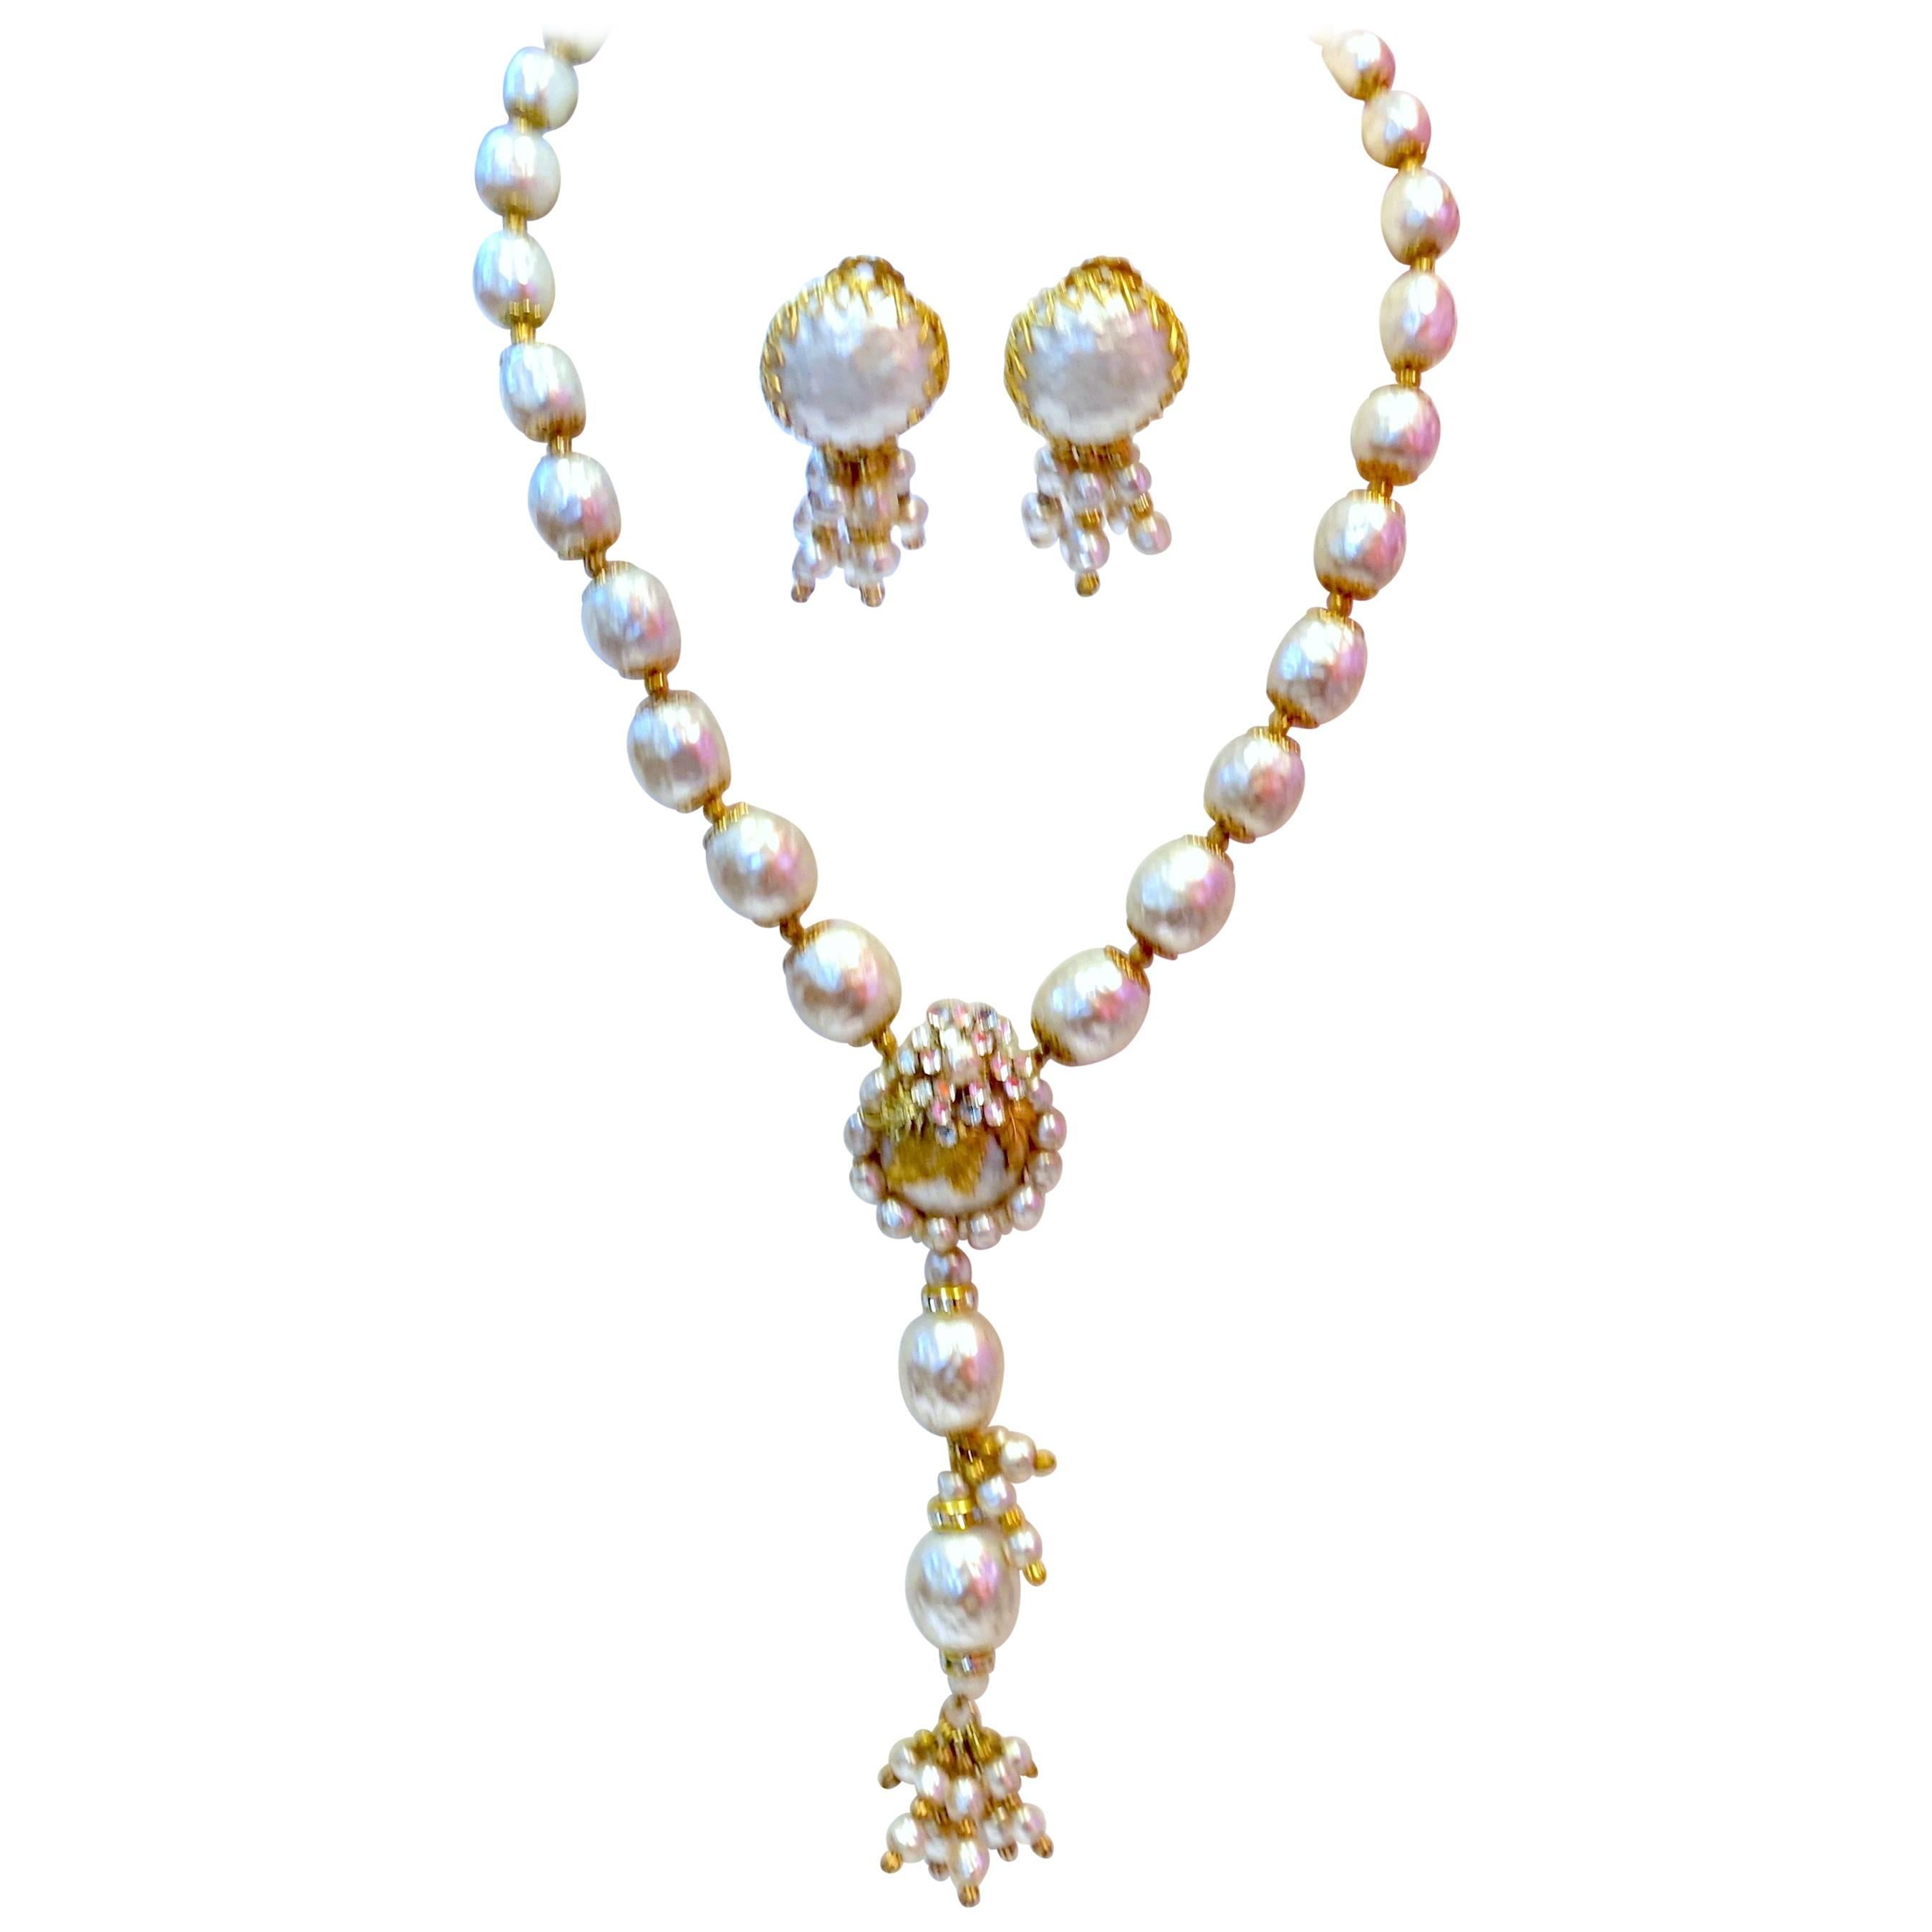 Vintage Miriam Haskell Faux Pearl Drop Necklace And Earrings Set